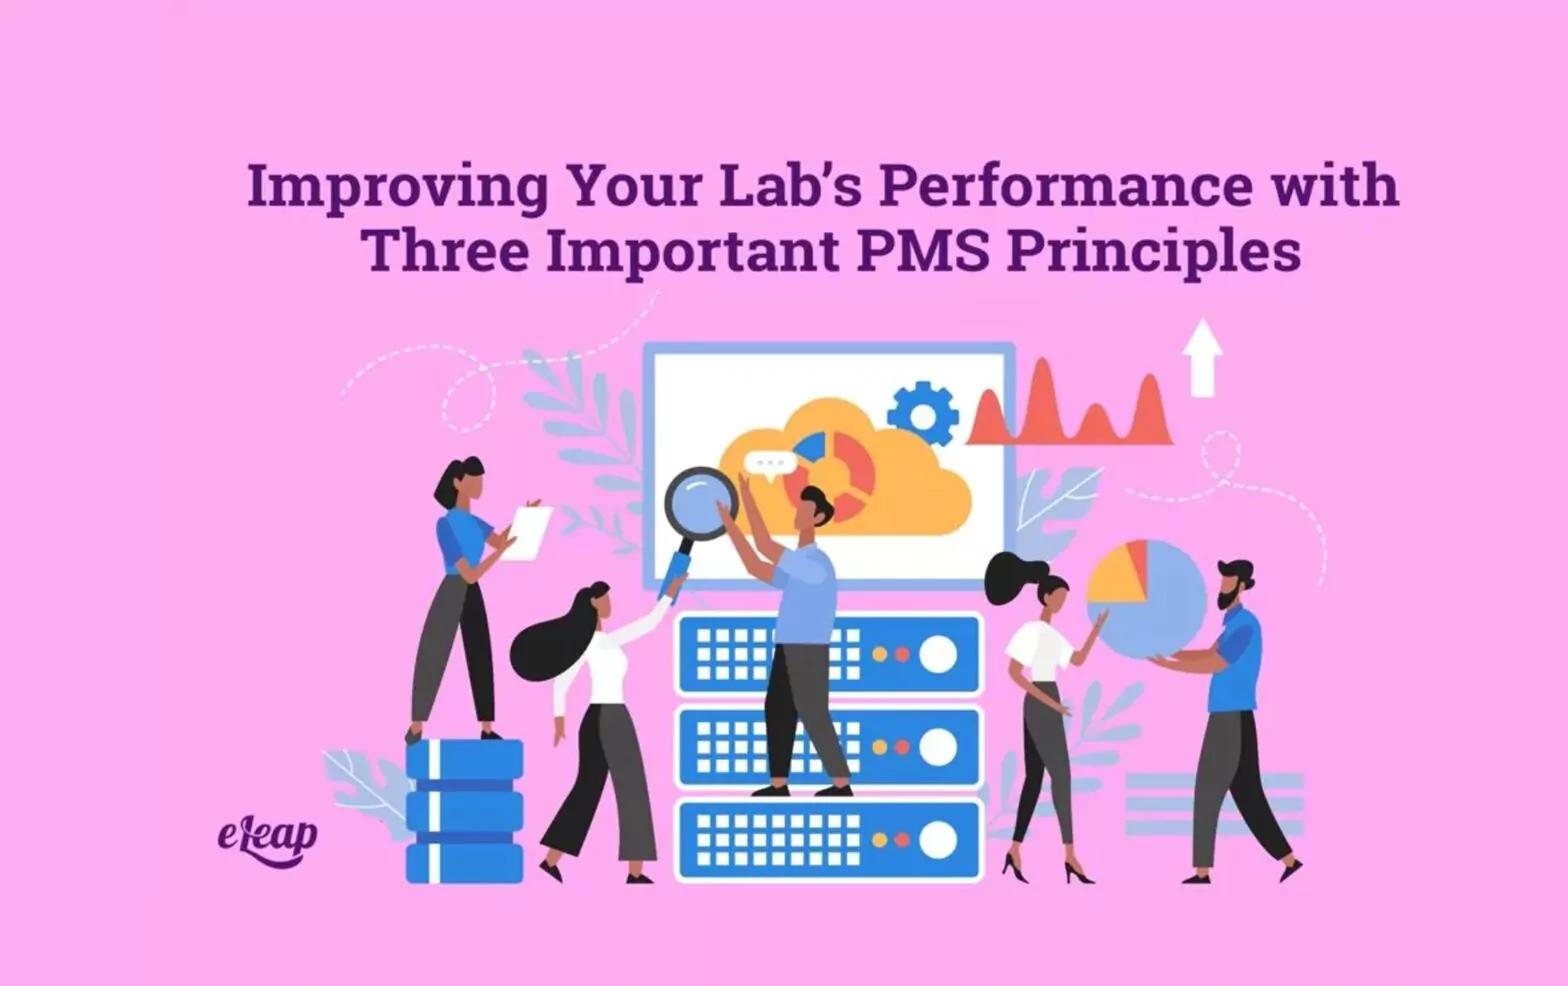 Improving Your Lab’s Performance with Three Important PMS Principles